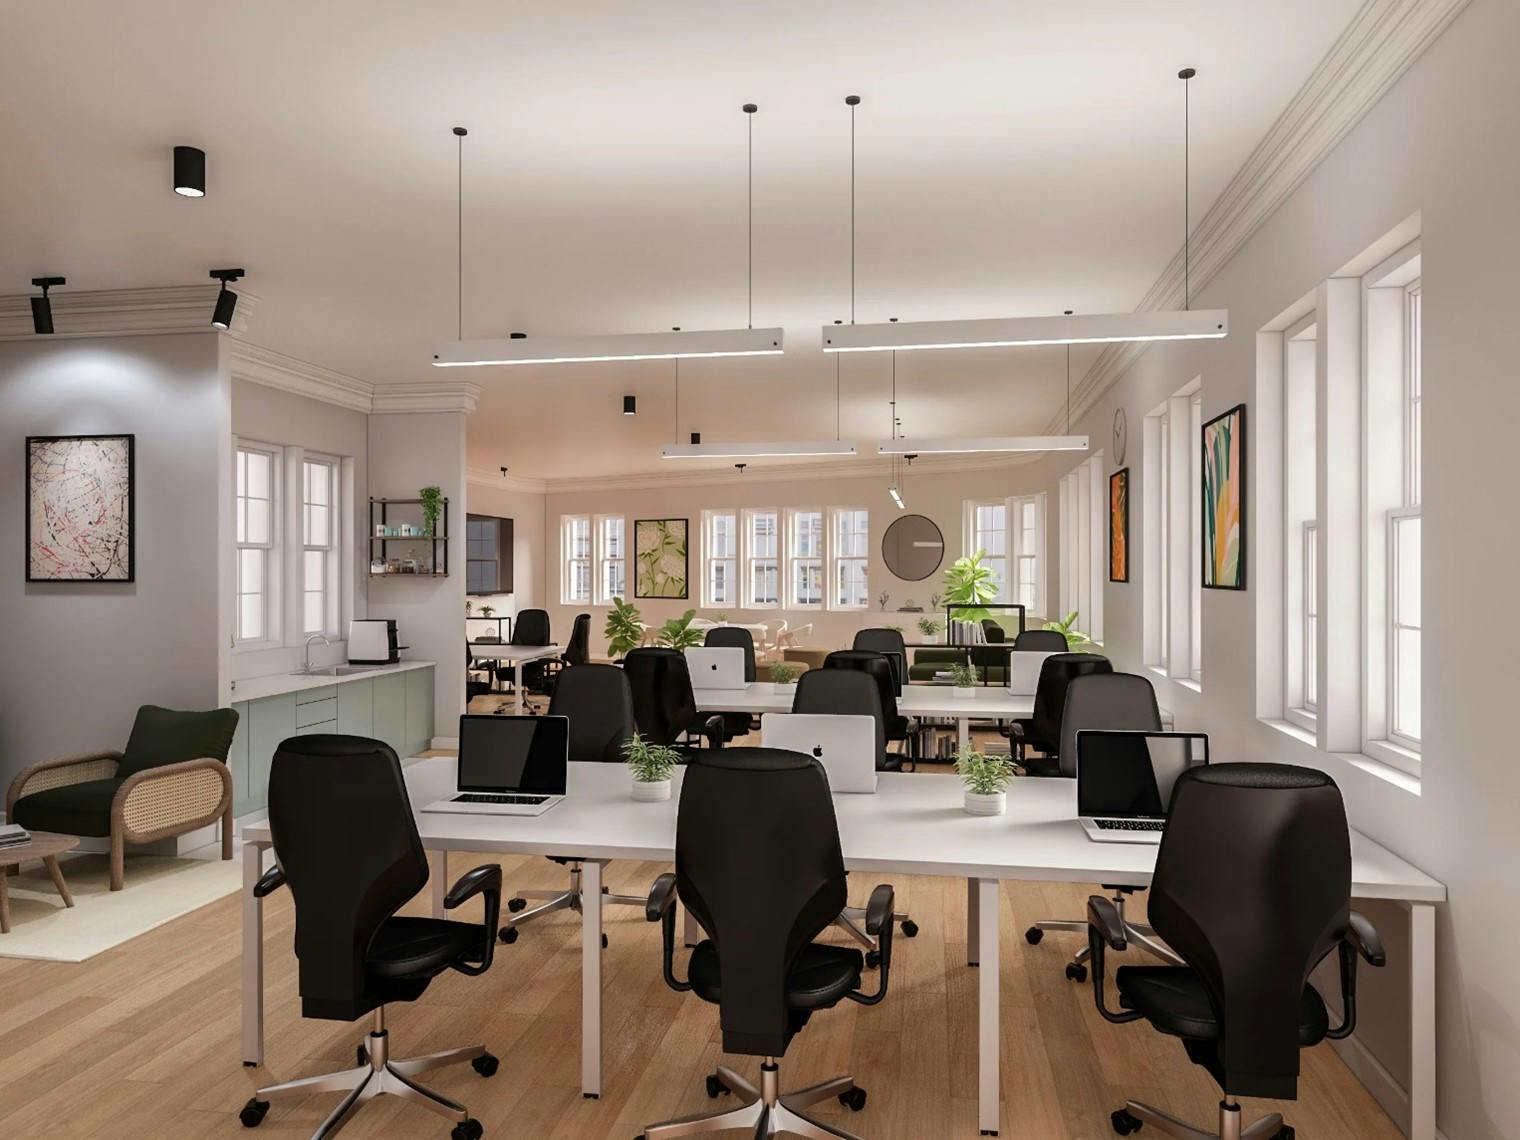  Mayfair – 12 Person Office – Oxford Street